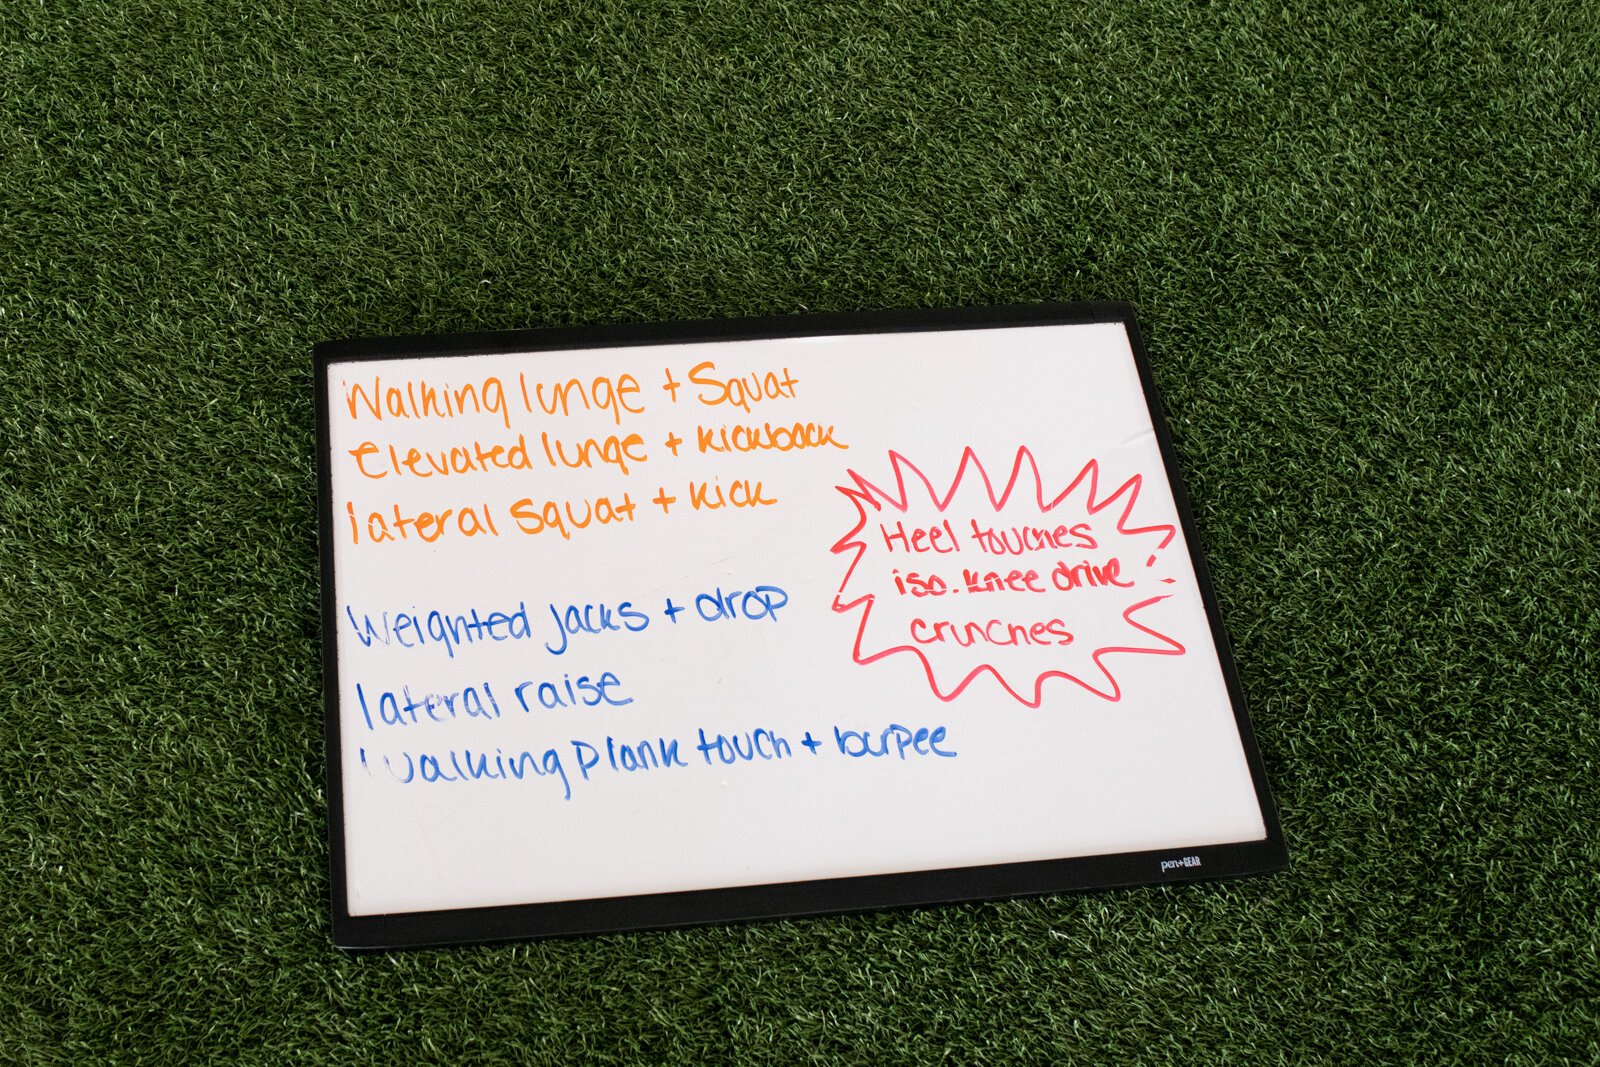 The class plan for a group workout session created by Victoria "Tori" Soto of Tori Leigh Fitness.